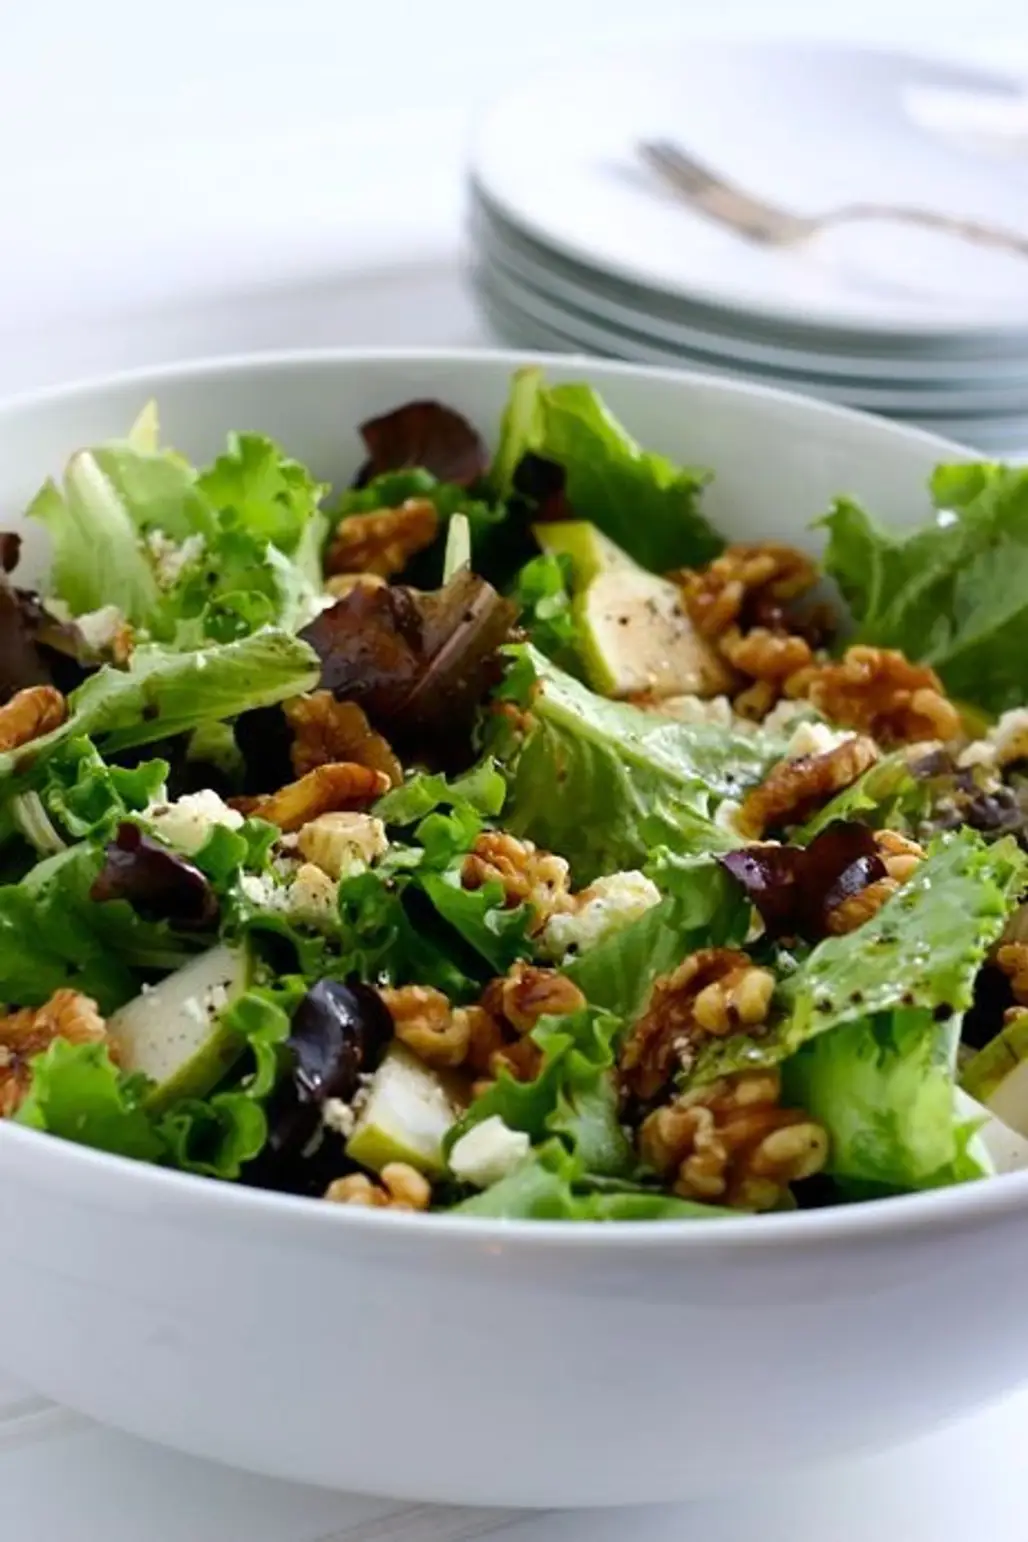 Pear, Walnut and Feta Salad with Balsamic and Olive Oil Dressing